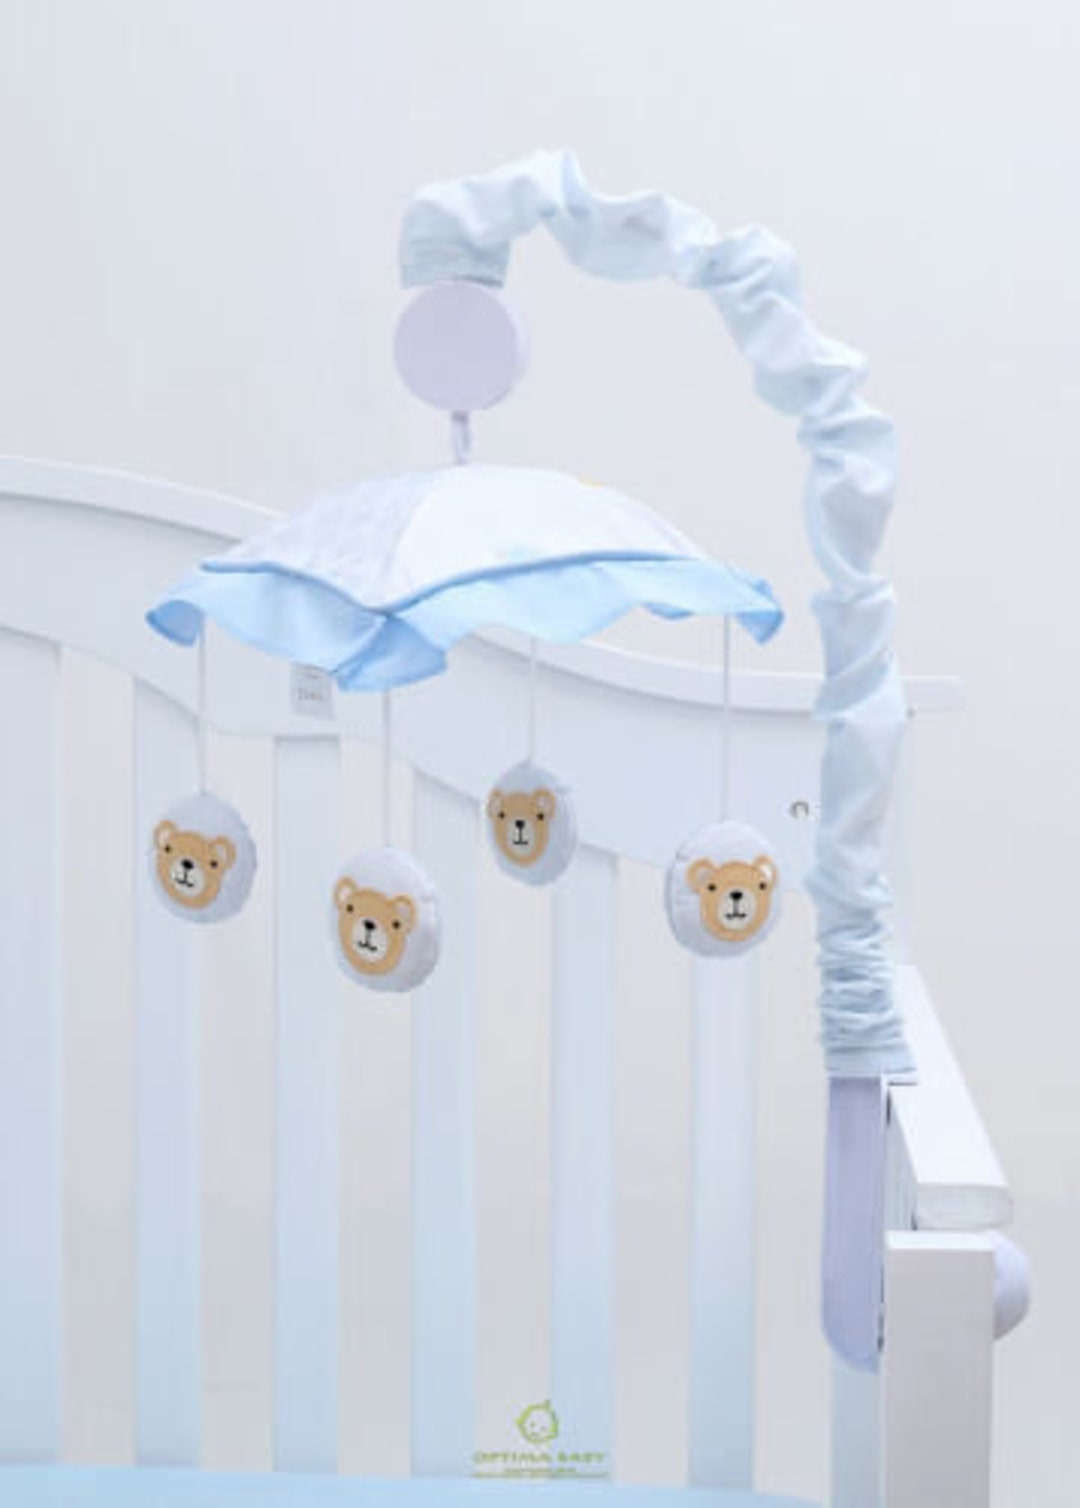 Baby Musical Mobile Crib Bed Bell Cot Mobile Dreams Nursery Lullaby